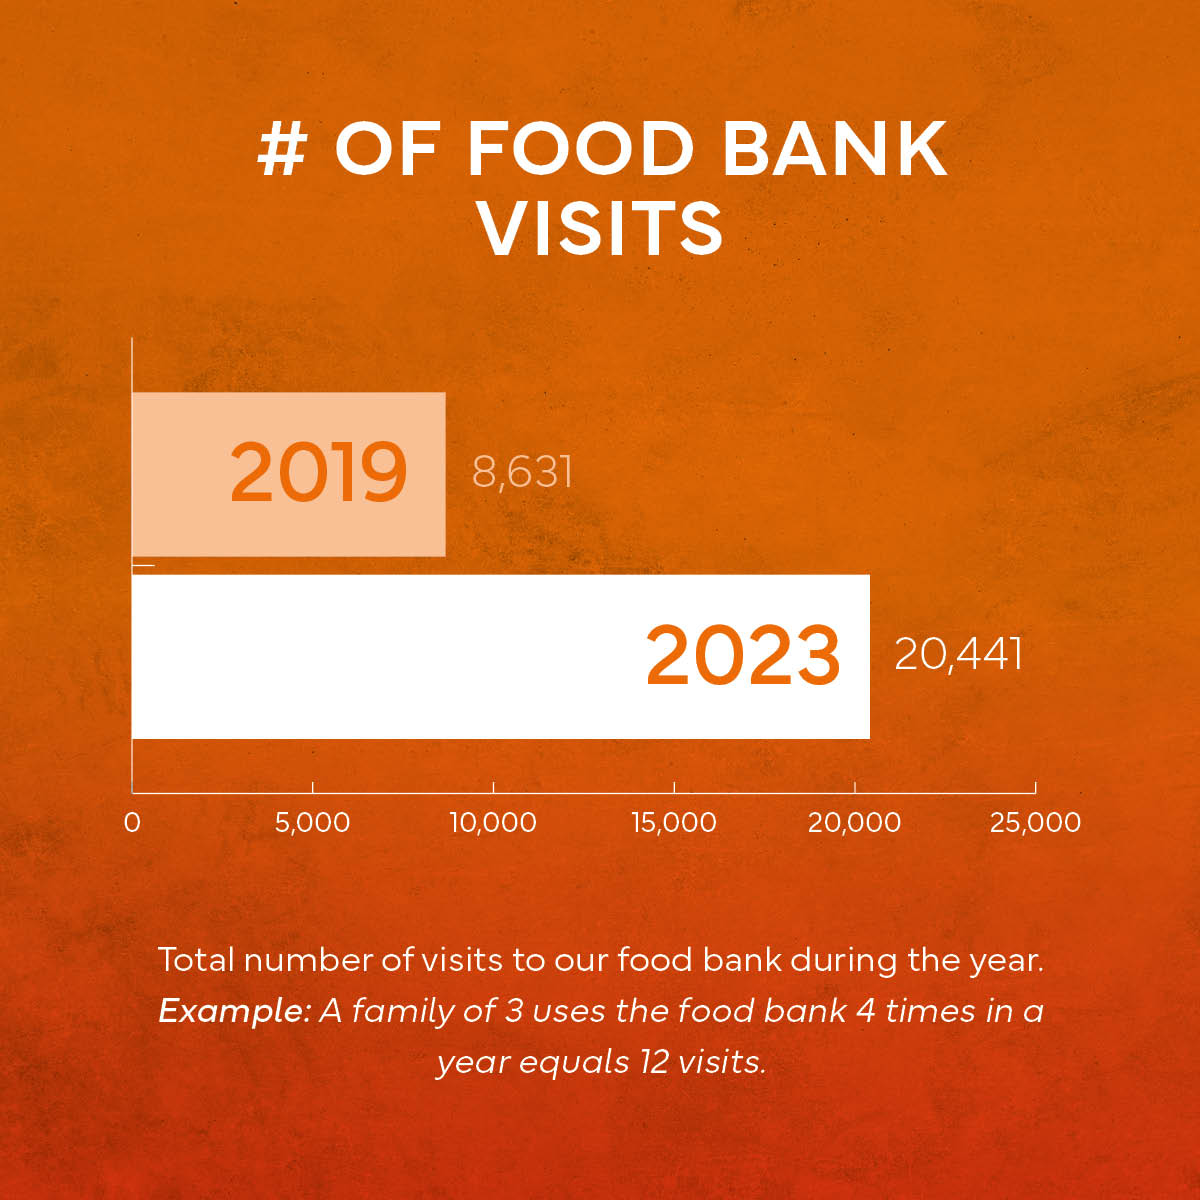 Infographic for number of food bank visits. Total number of visits to The Hope Centre food bank during the year 2019 was 8,631 and in 2023 20,441.